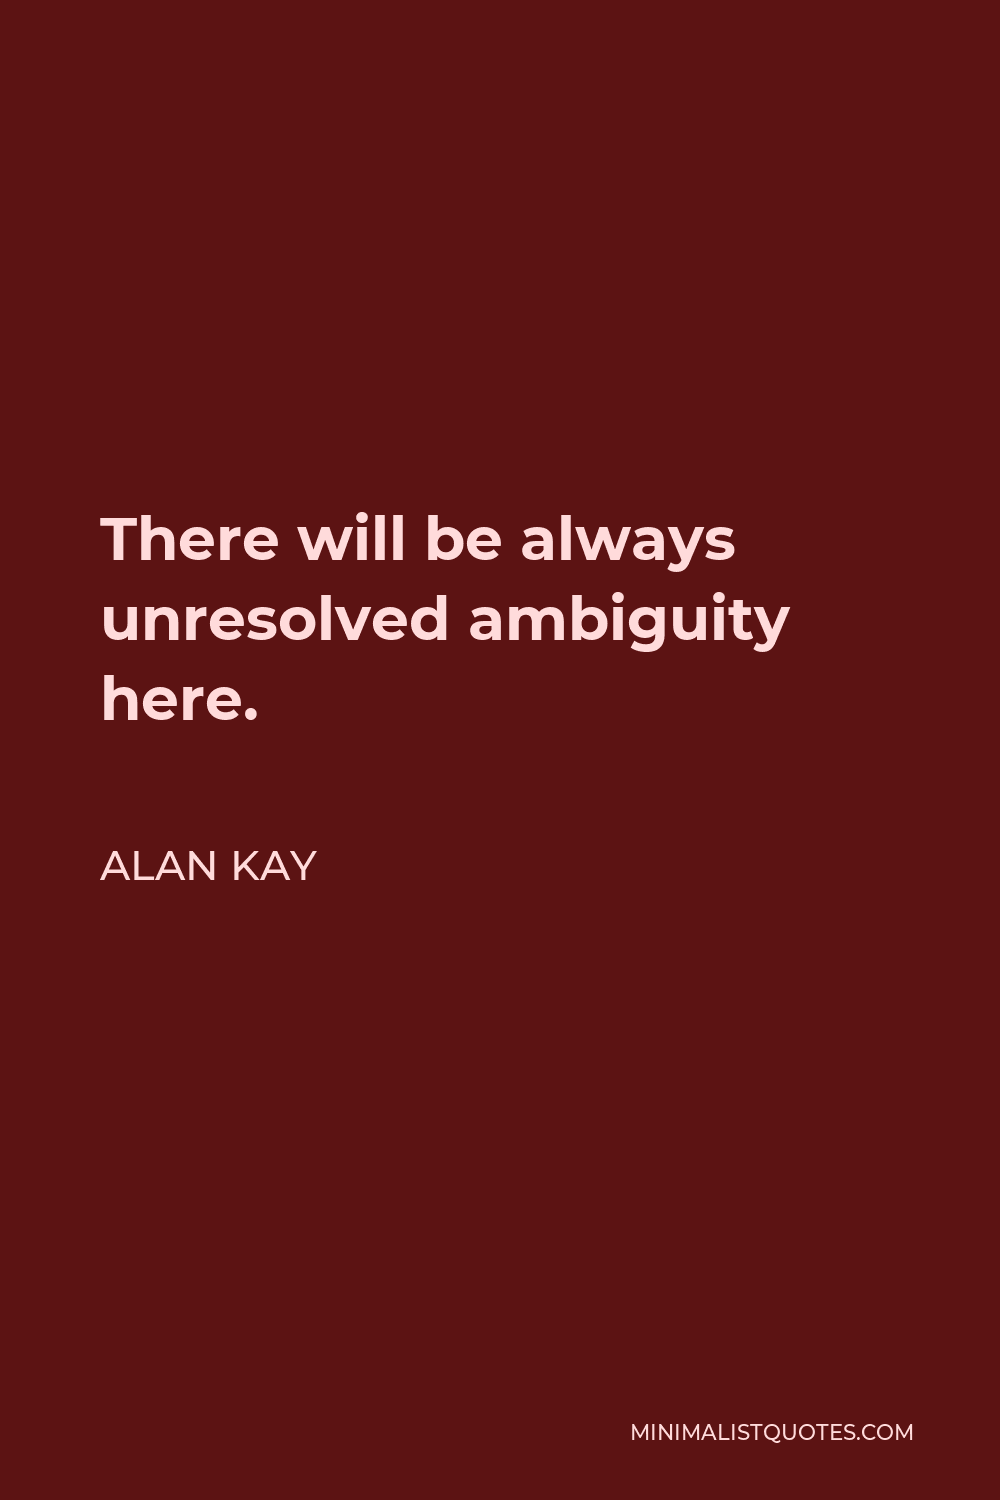 Alan Kay Quote - There will be always unresolved ambiguity here.